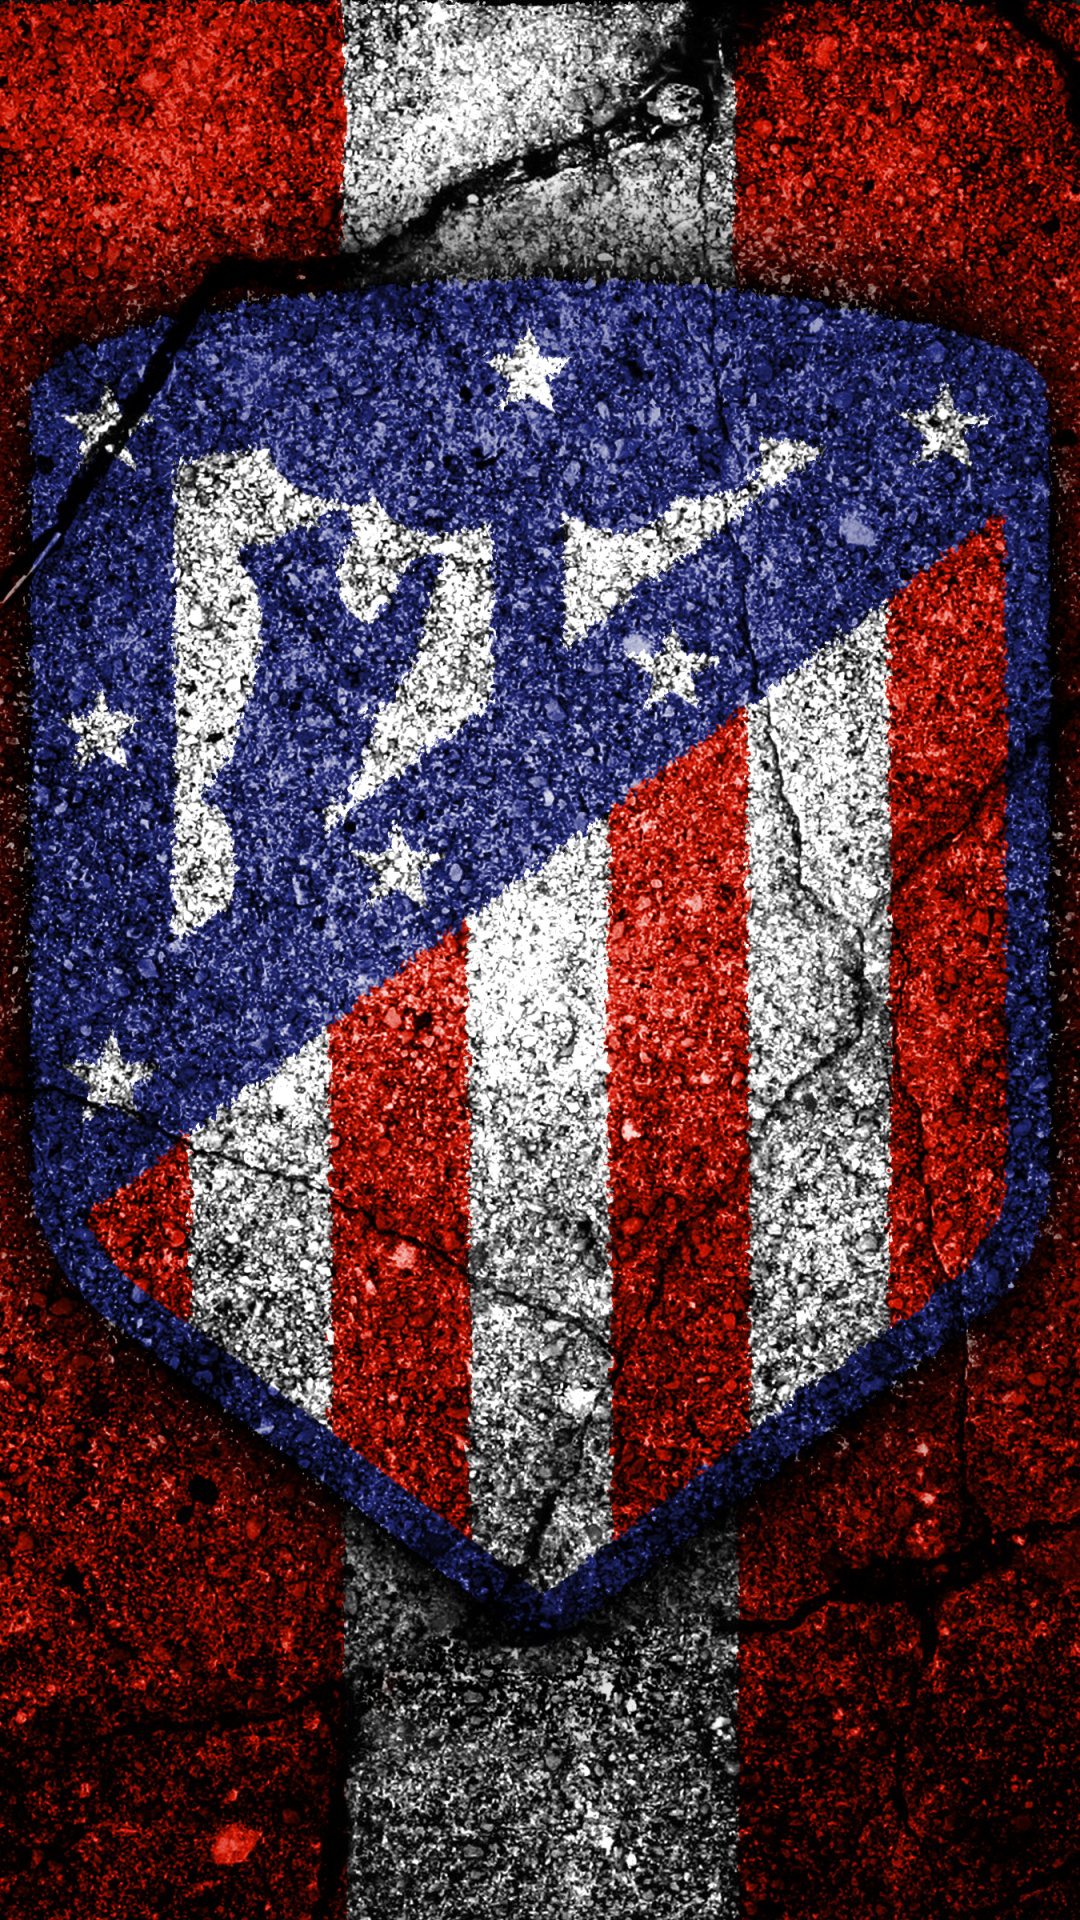 Atletico Madrid: Luis Aragones led the club to victories in the Copa del Rey in 1976 and La Liga in 1977. 1080x1920 Full HD Wallpaper.